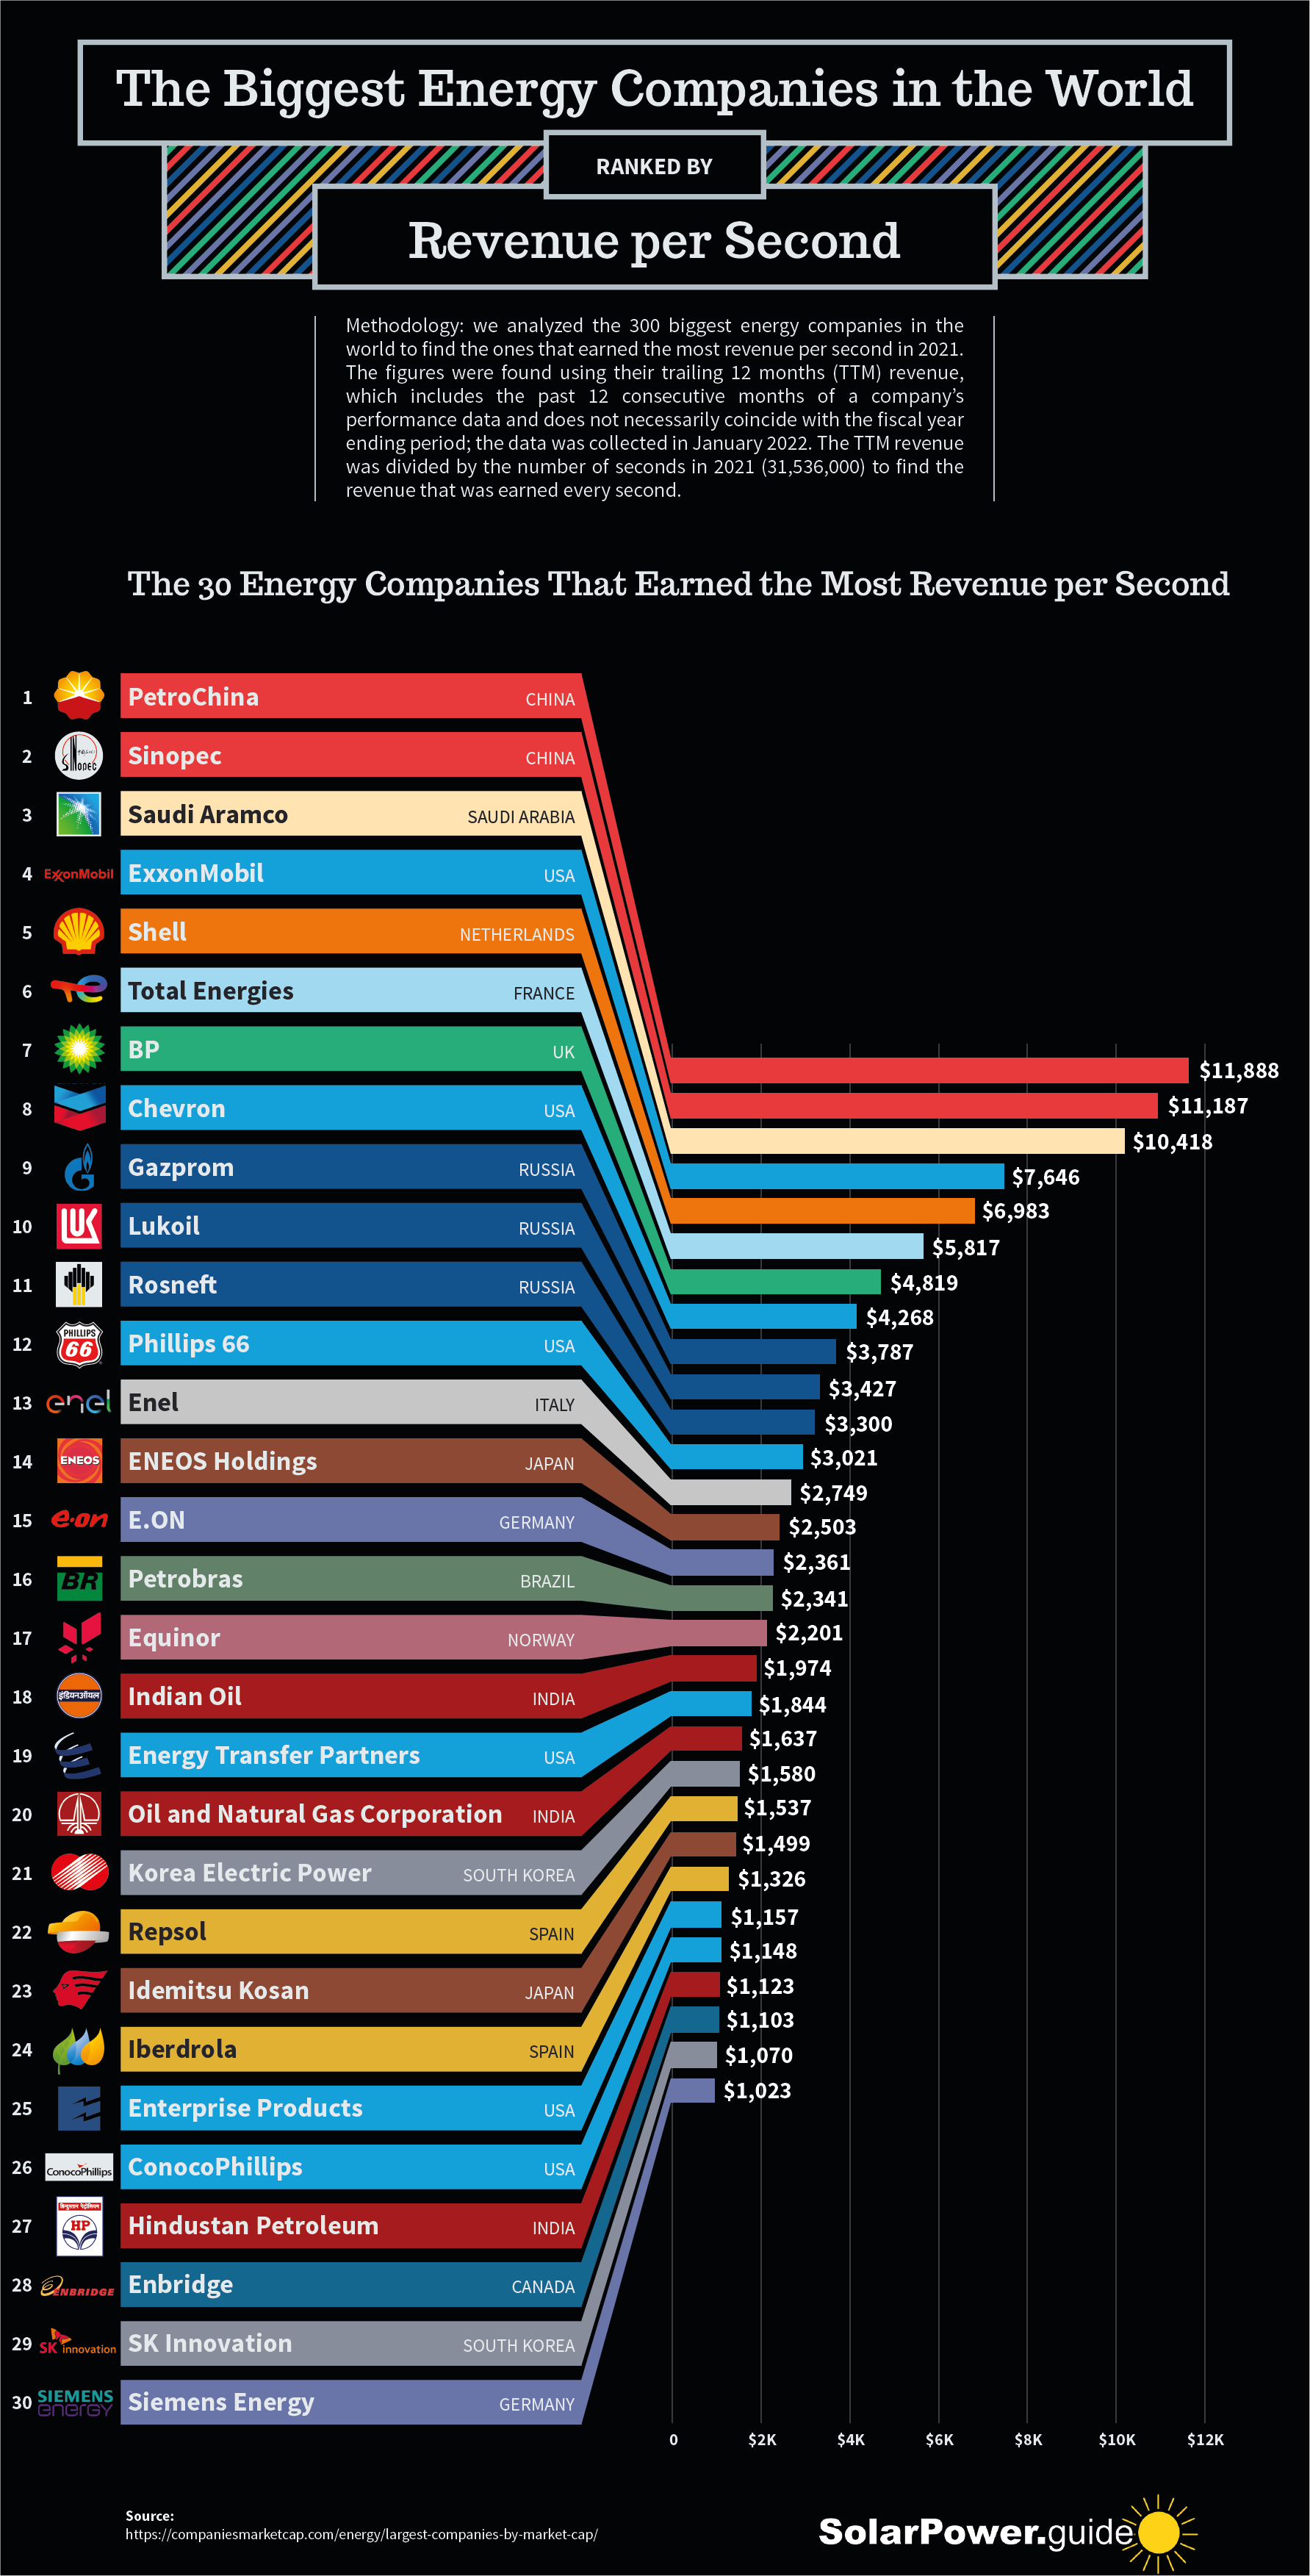 The Biggest Energy Companies In The World Ranked By Revenue Per Second 